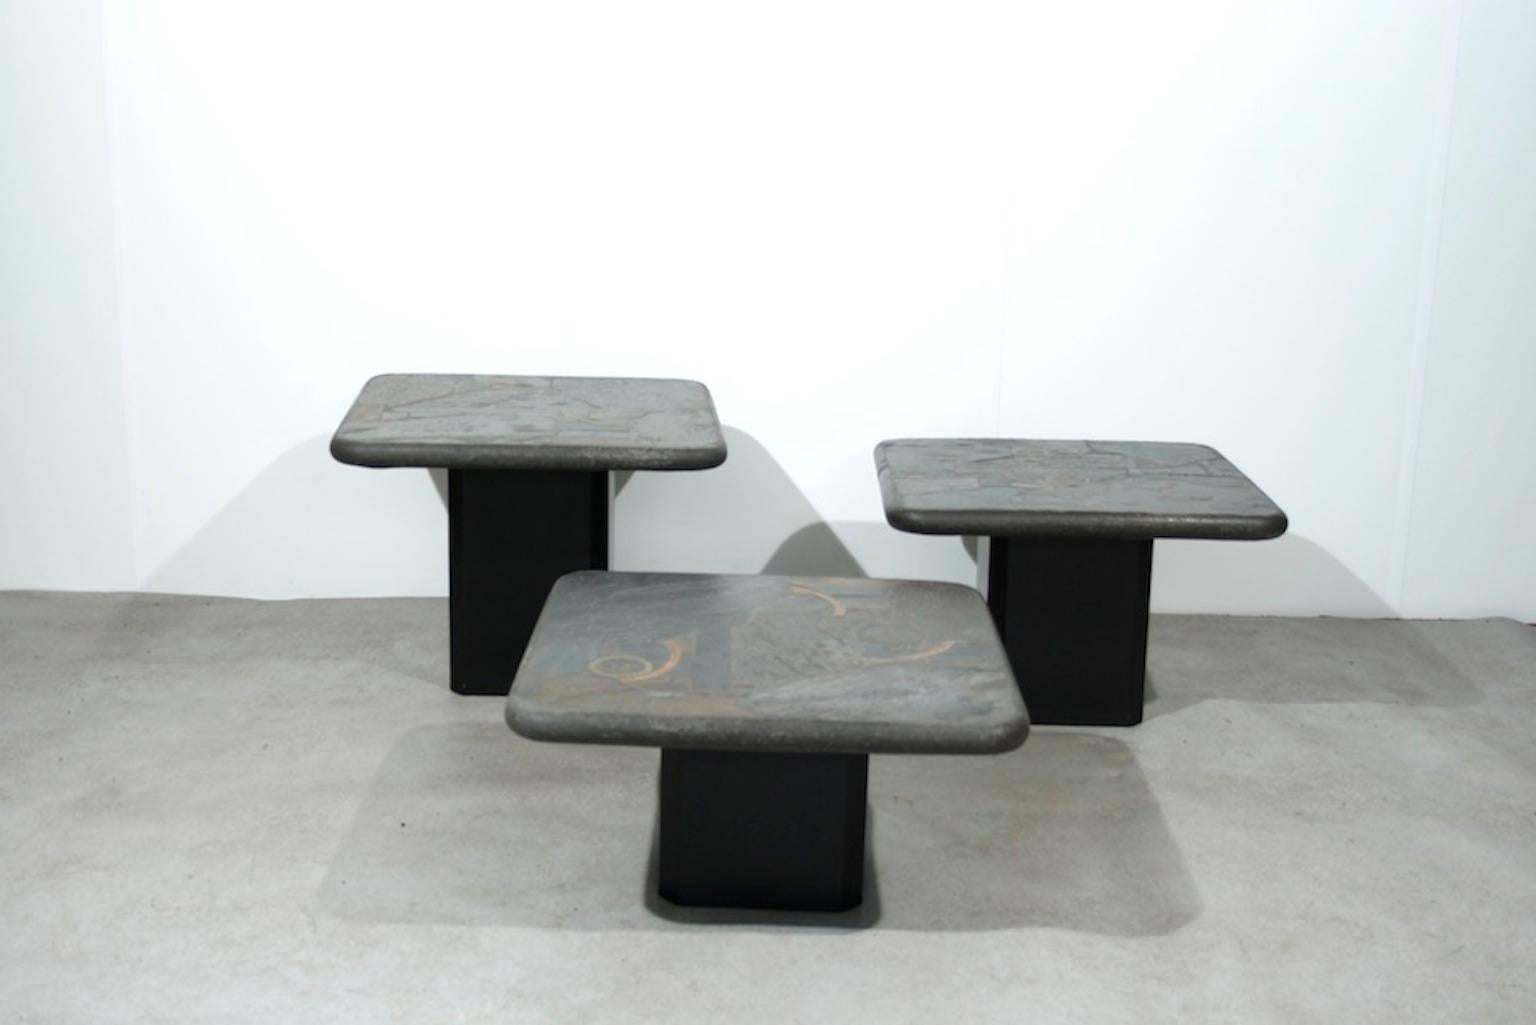 Matching trio of heavy stone top coffee tables on a wooden base. Signed by M. Kingma, the son of Paul Kingma. 

The tables come with an certificate.

They tables varies in three differrent heights:

Width: 60 cm
Length: 60 cm
Height: 31 - 39